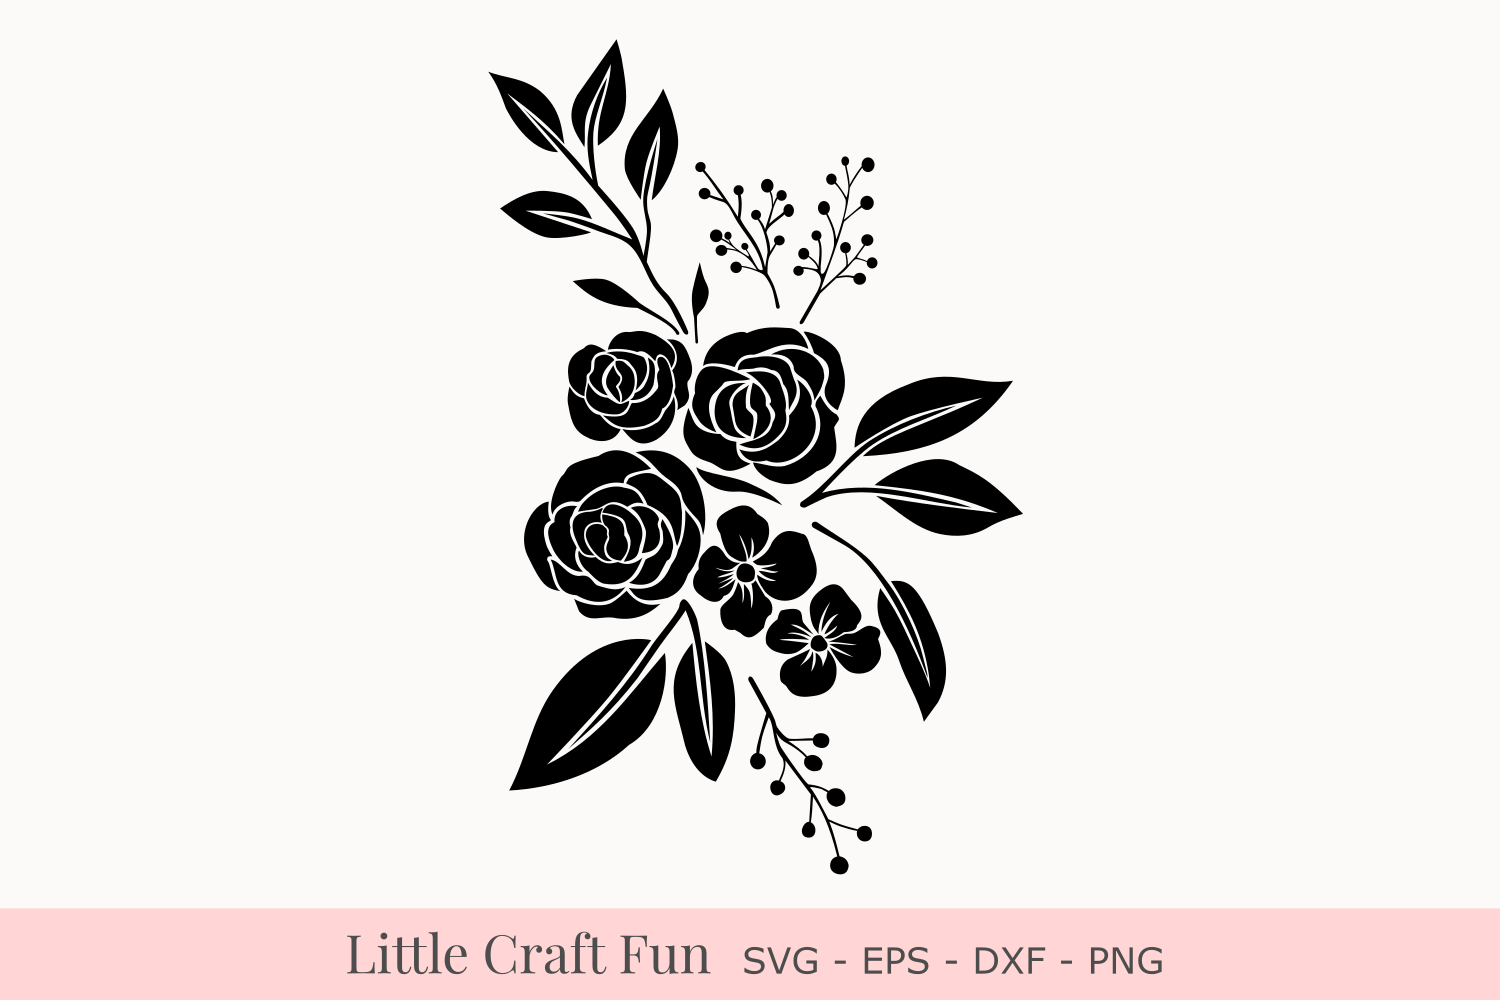 Download Rose Flowers Silhouette Svg, Rose Florals Silhouette Svg ...